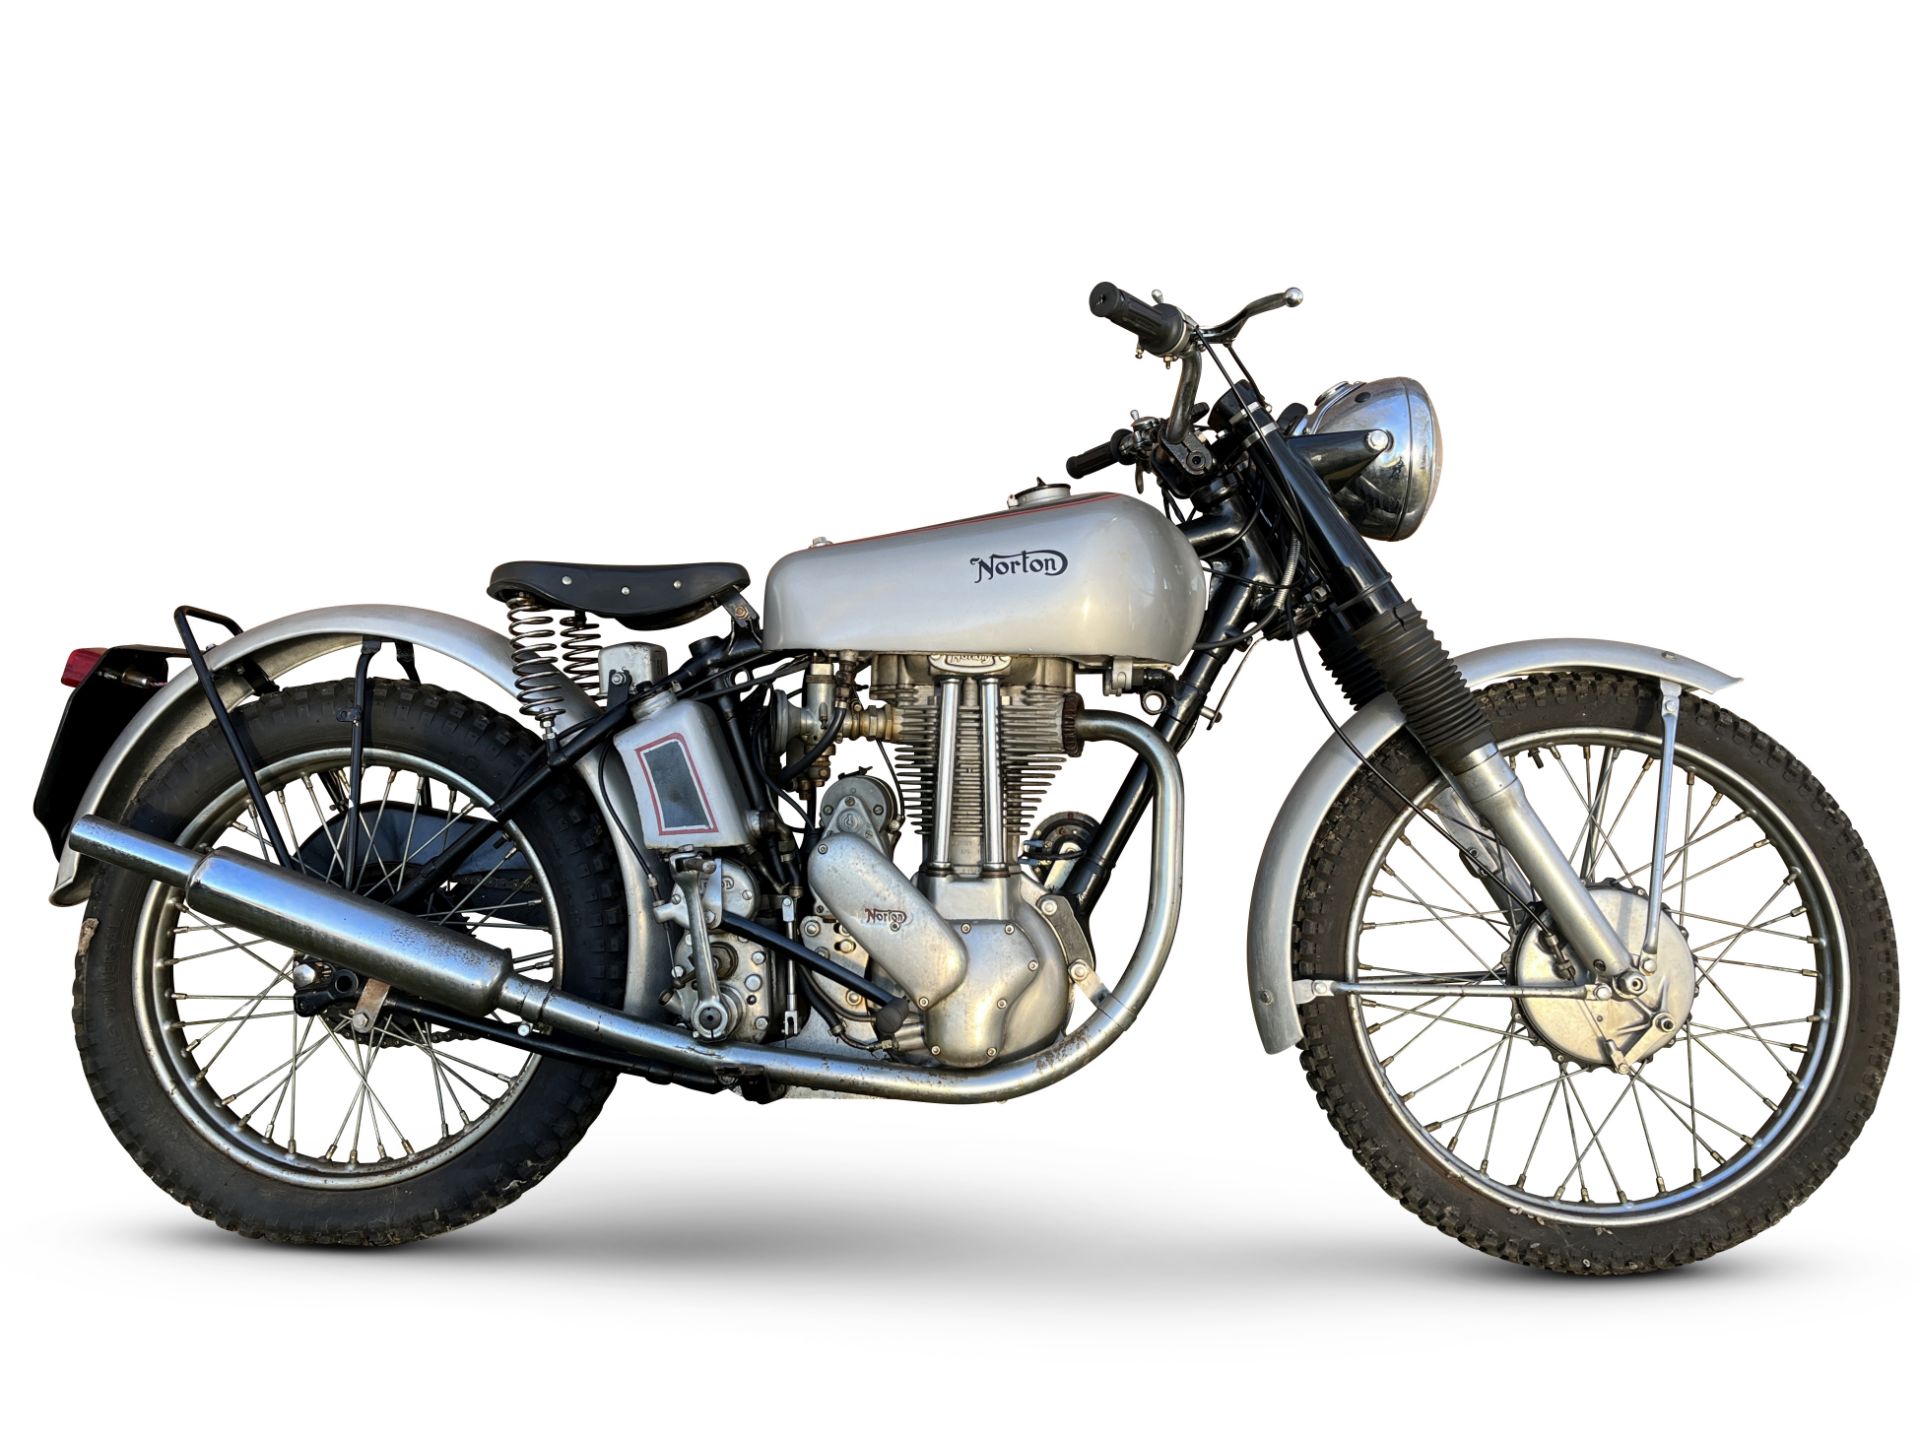 The Clive Wood MBE Collection, 1951 Norton 490cc 500T Frame no. F3T 40263 Engine no. 40263 F3T